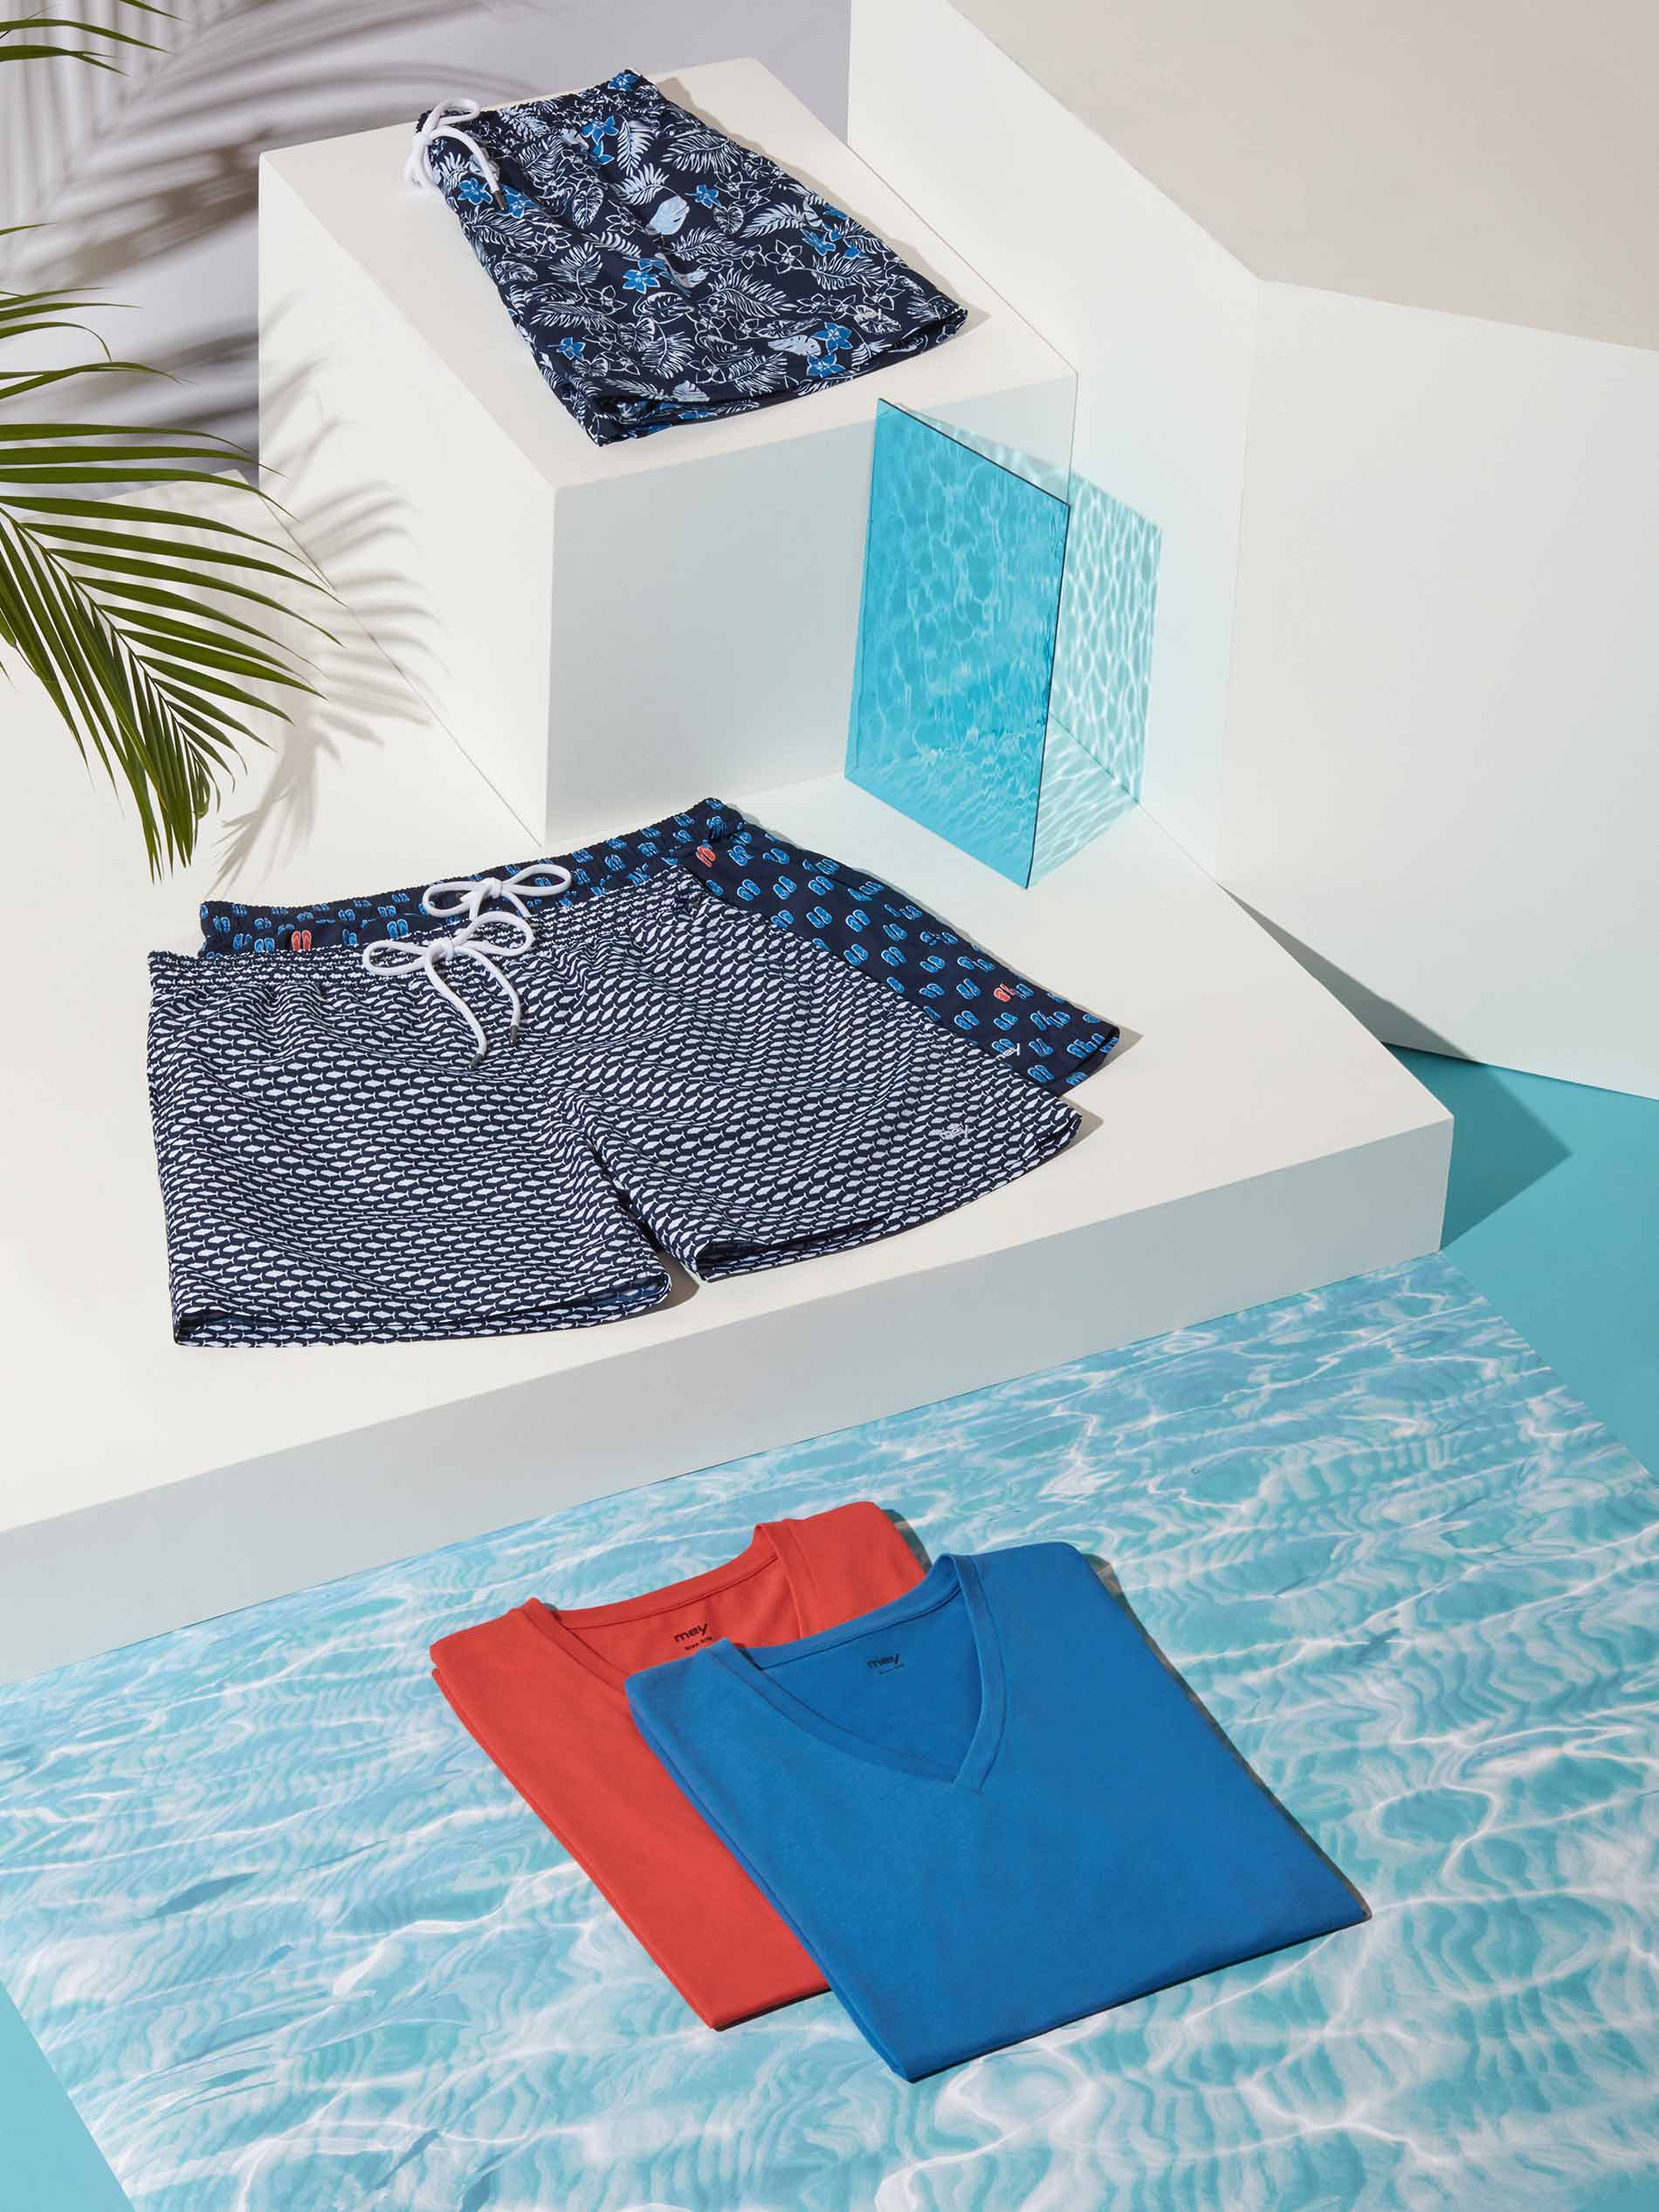 swimwear: swimming shorts and coloured T-shirts arranged on white blocks with water and palm leaves in the background | mey®